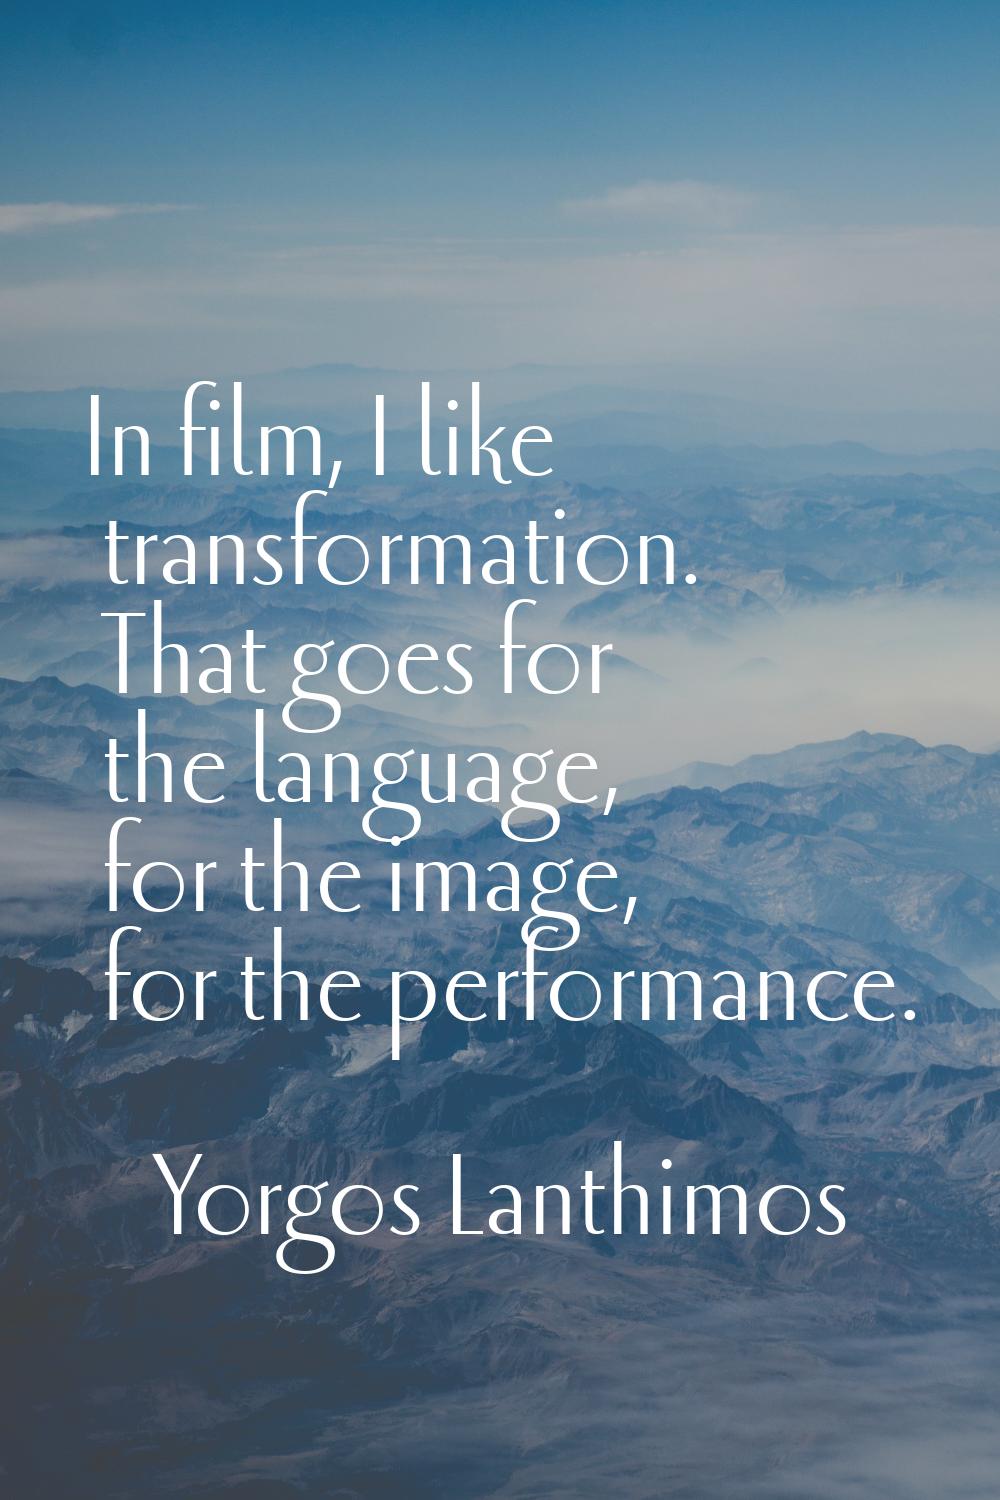 In film, I like transformation. That goes for the language, for the image, for the performance.